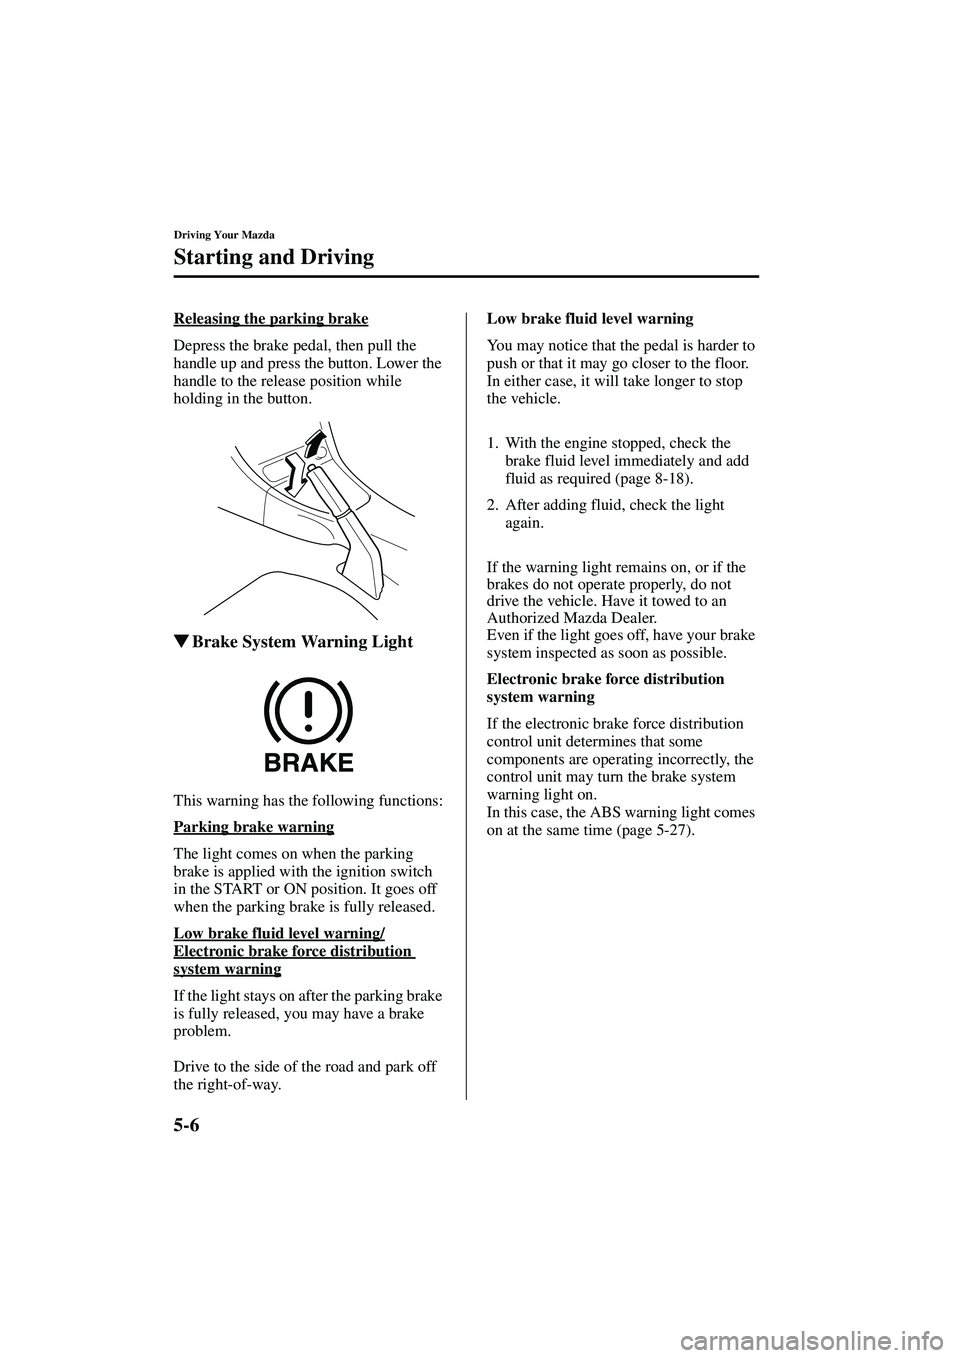 MAZDA MODEL MX-5 MIATA 2004  Owners Manual 5-6
Driving Your Mazda
Starting and Driving
Form No. 8S15-EA-03G
Releasing the parking brake
Depress the brake pedal, then pull the 
handle up and press the button. Lower the 
handle to the release po